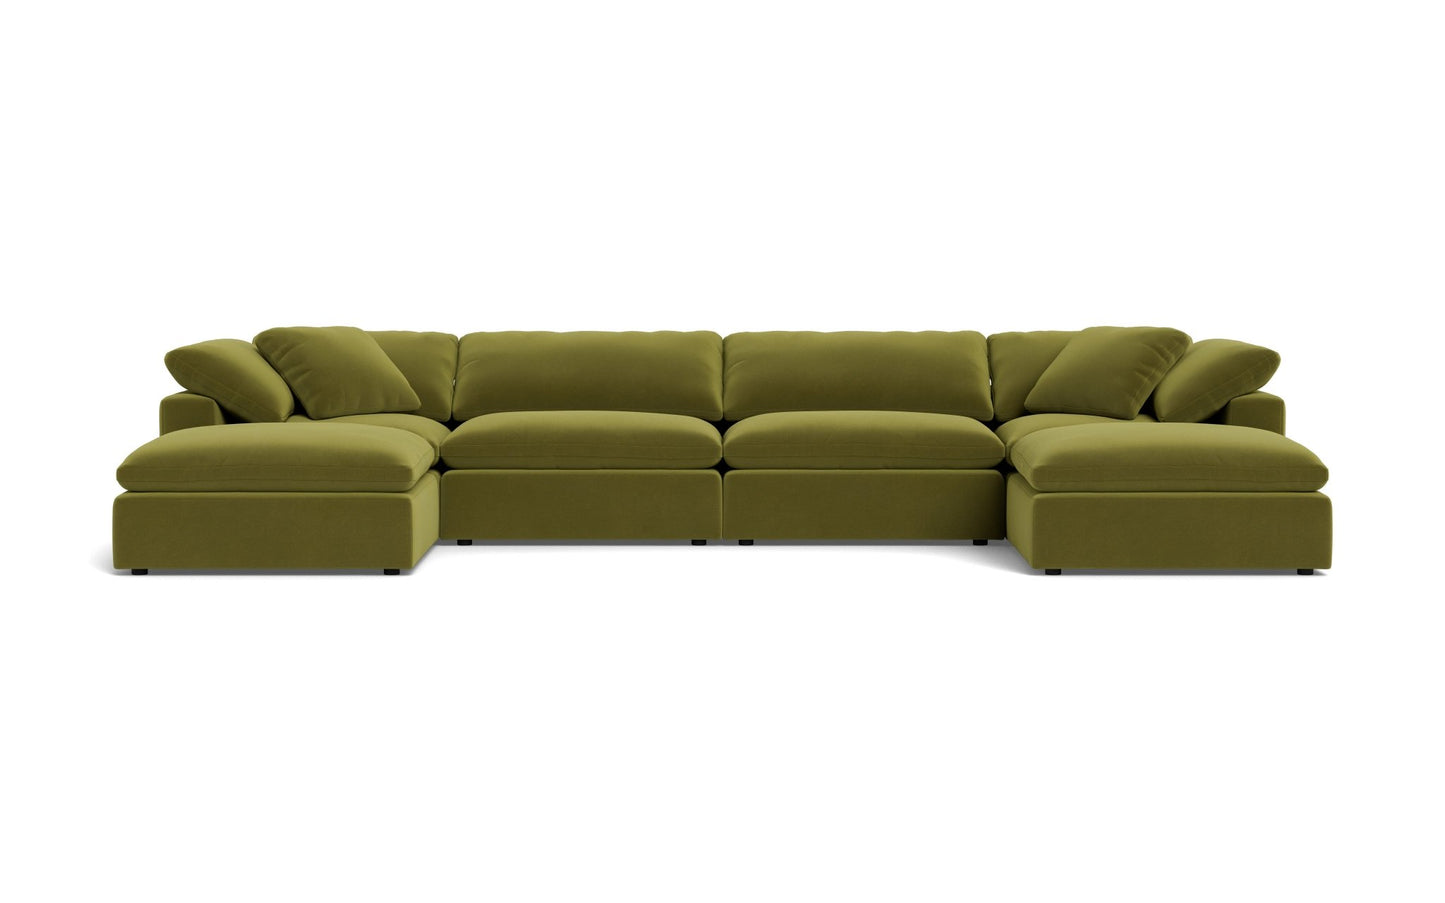 Fluffy 4 Piece Sectional W/Double Otto